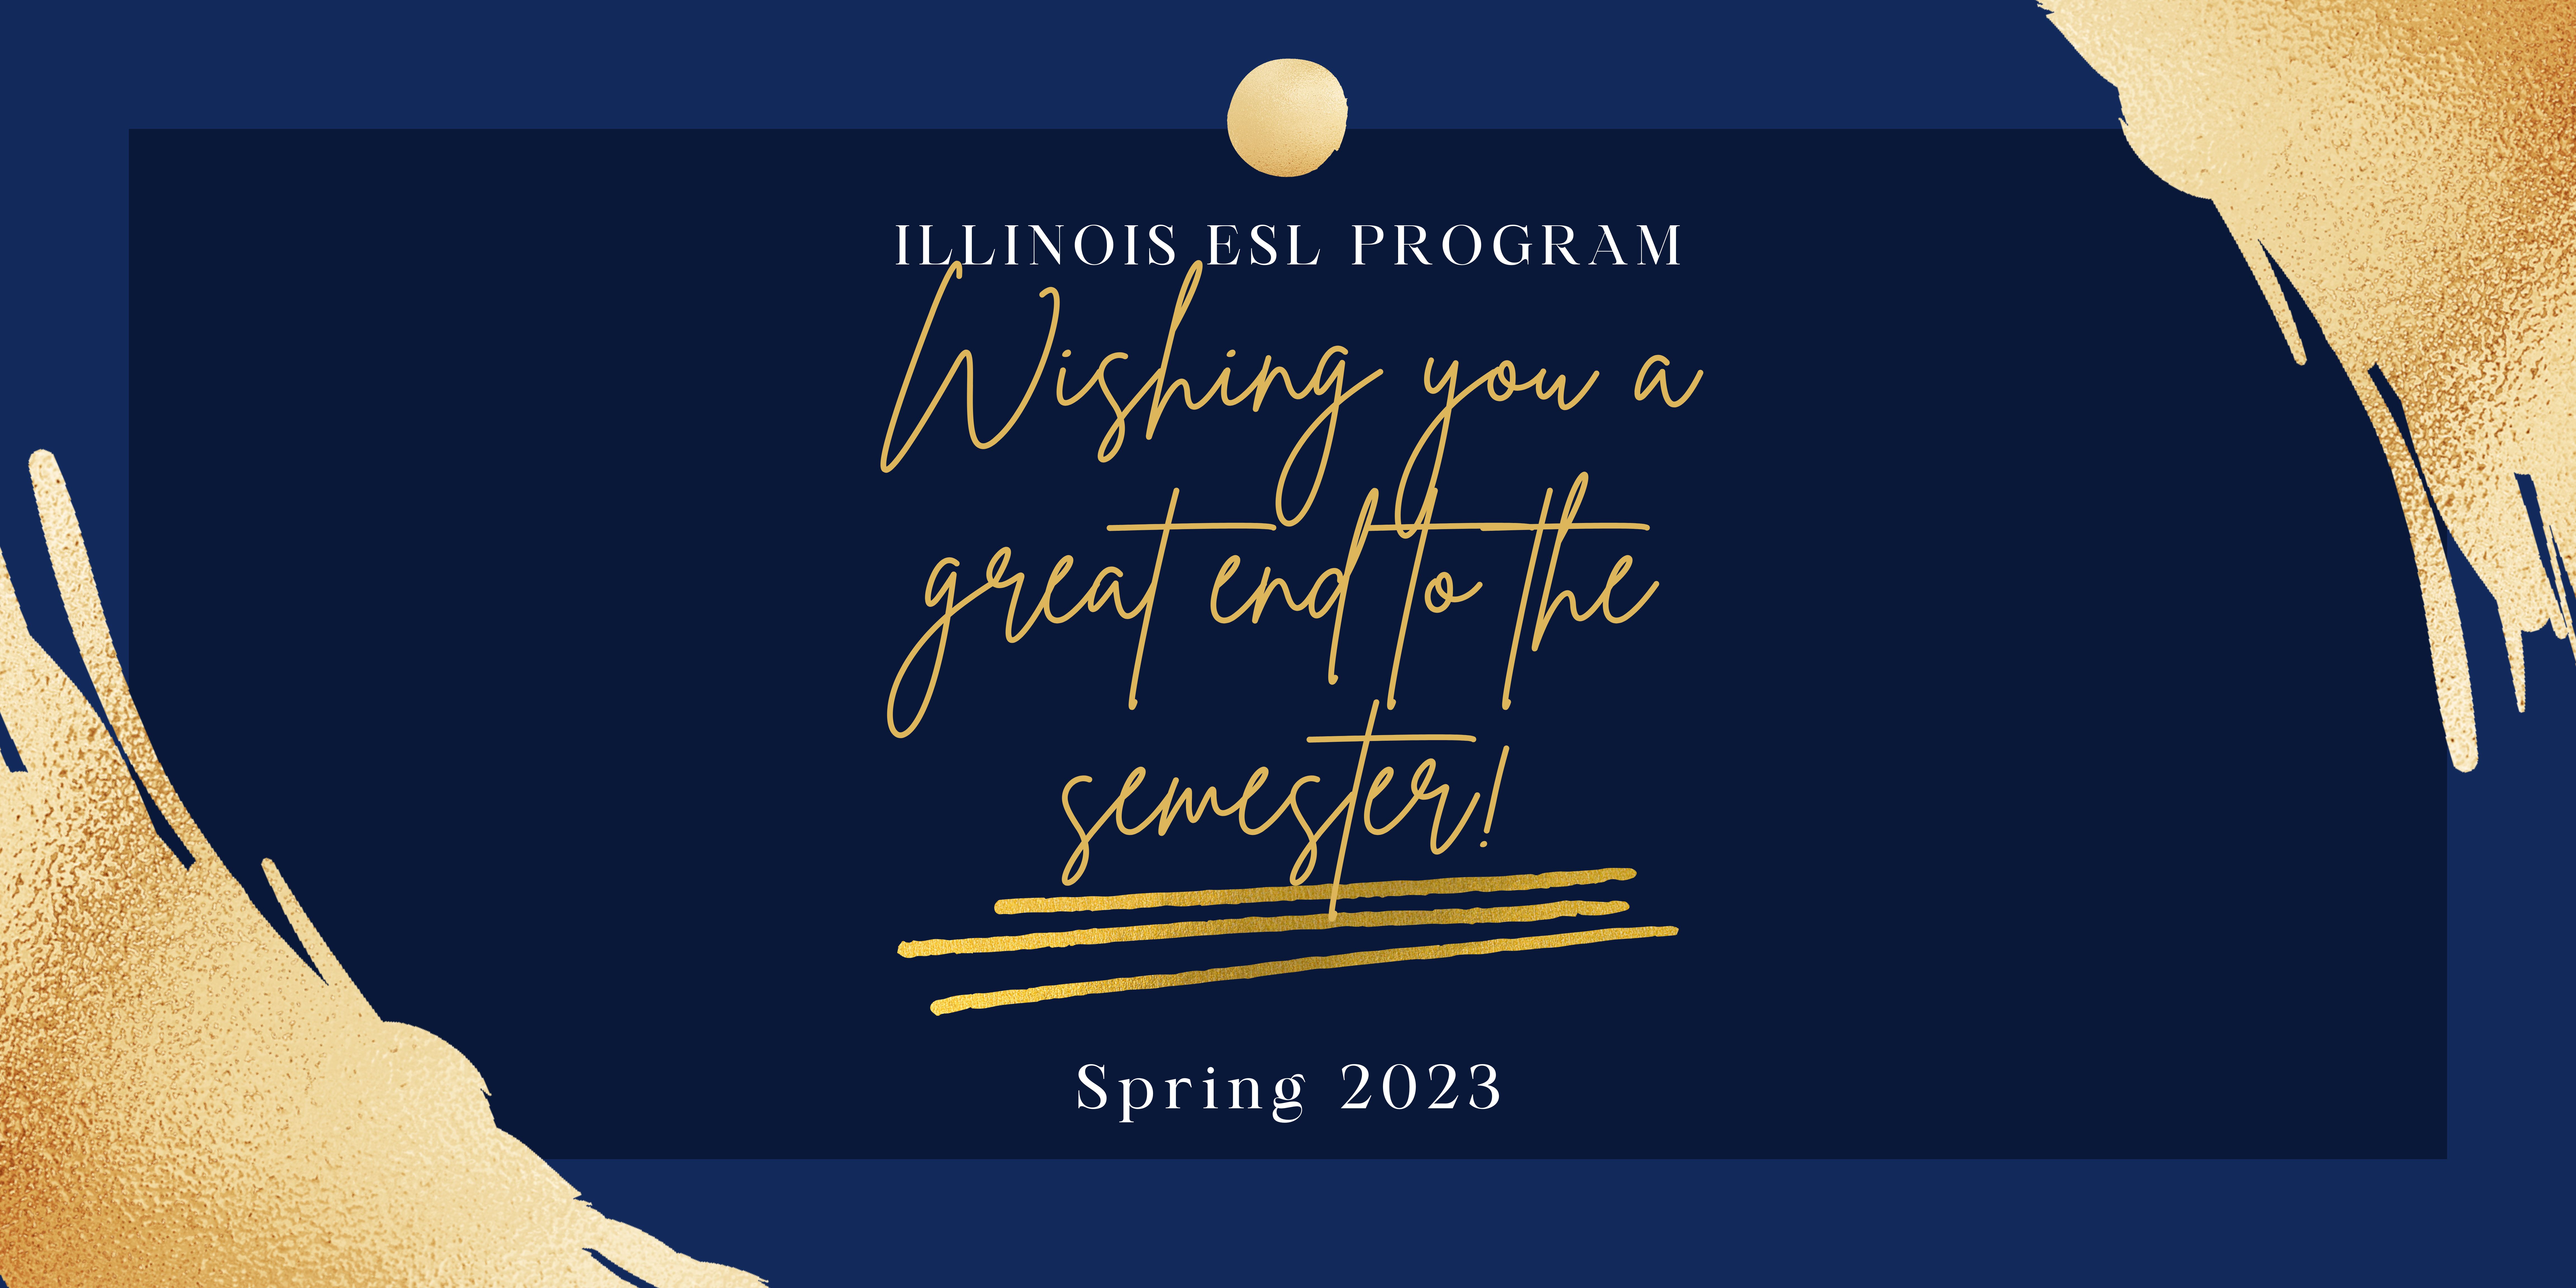 Wishing you a great end to the semester!